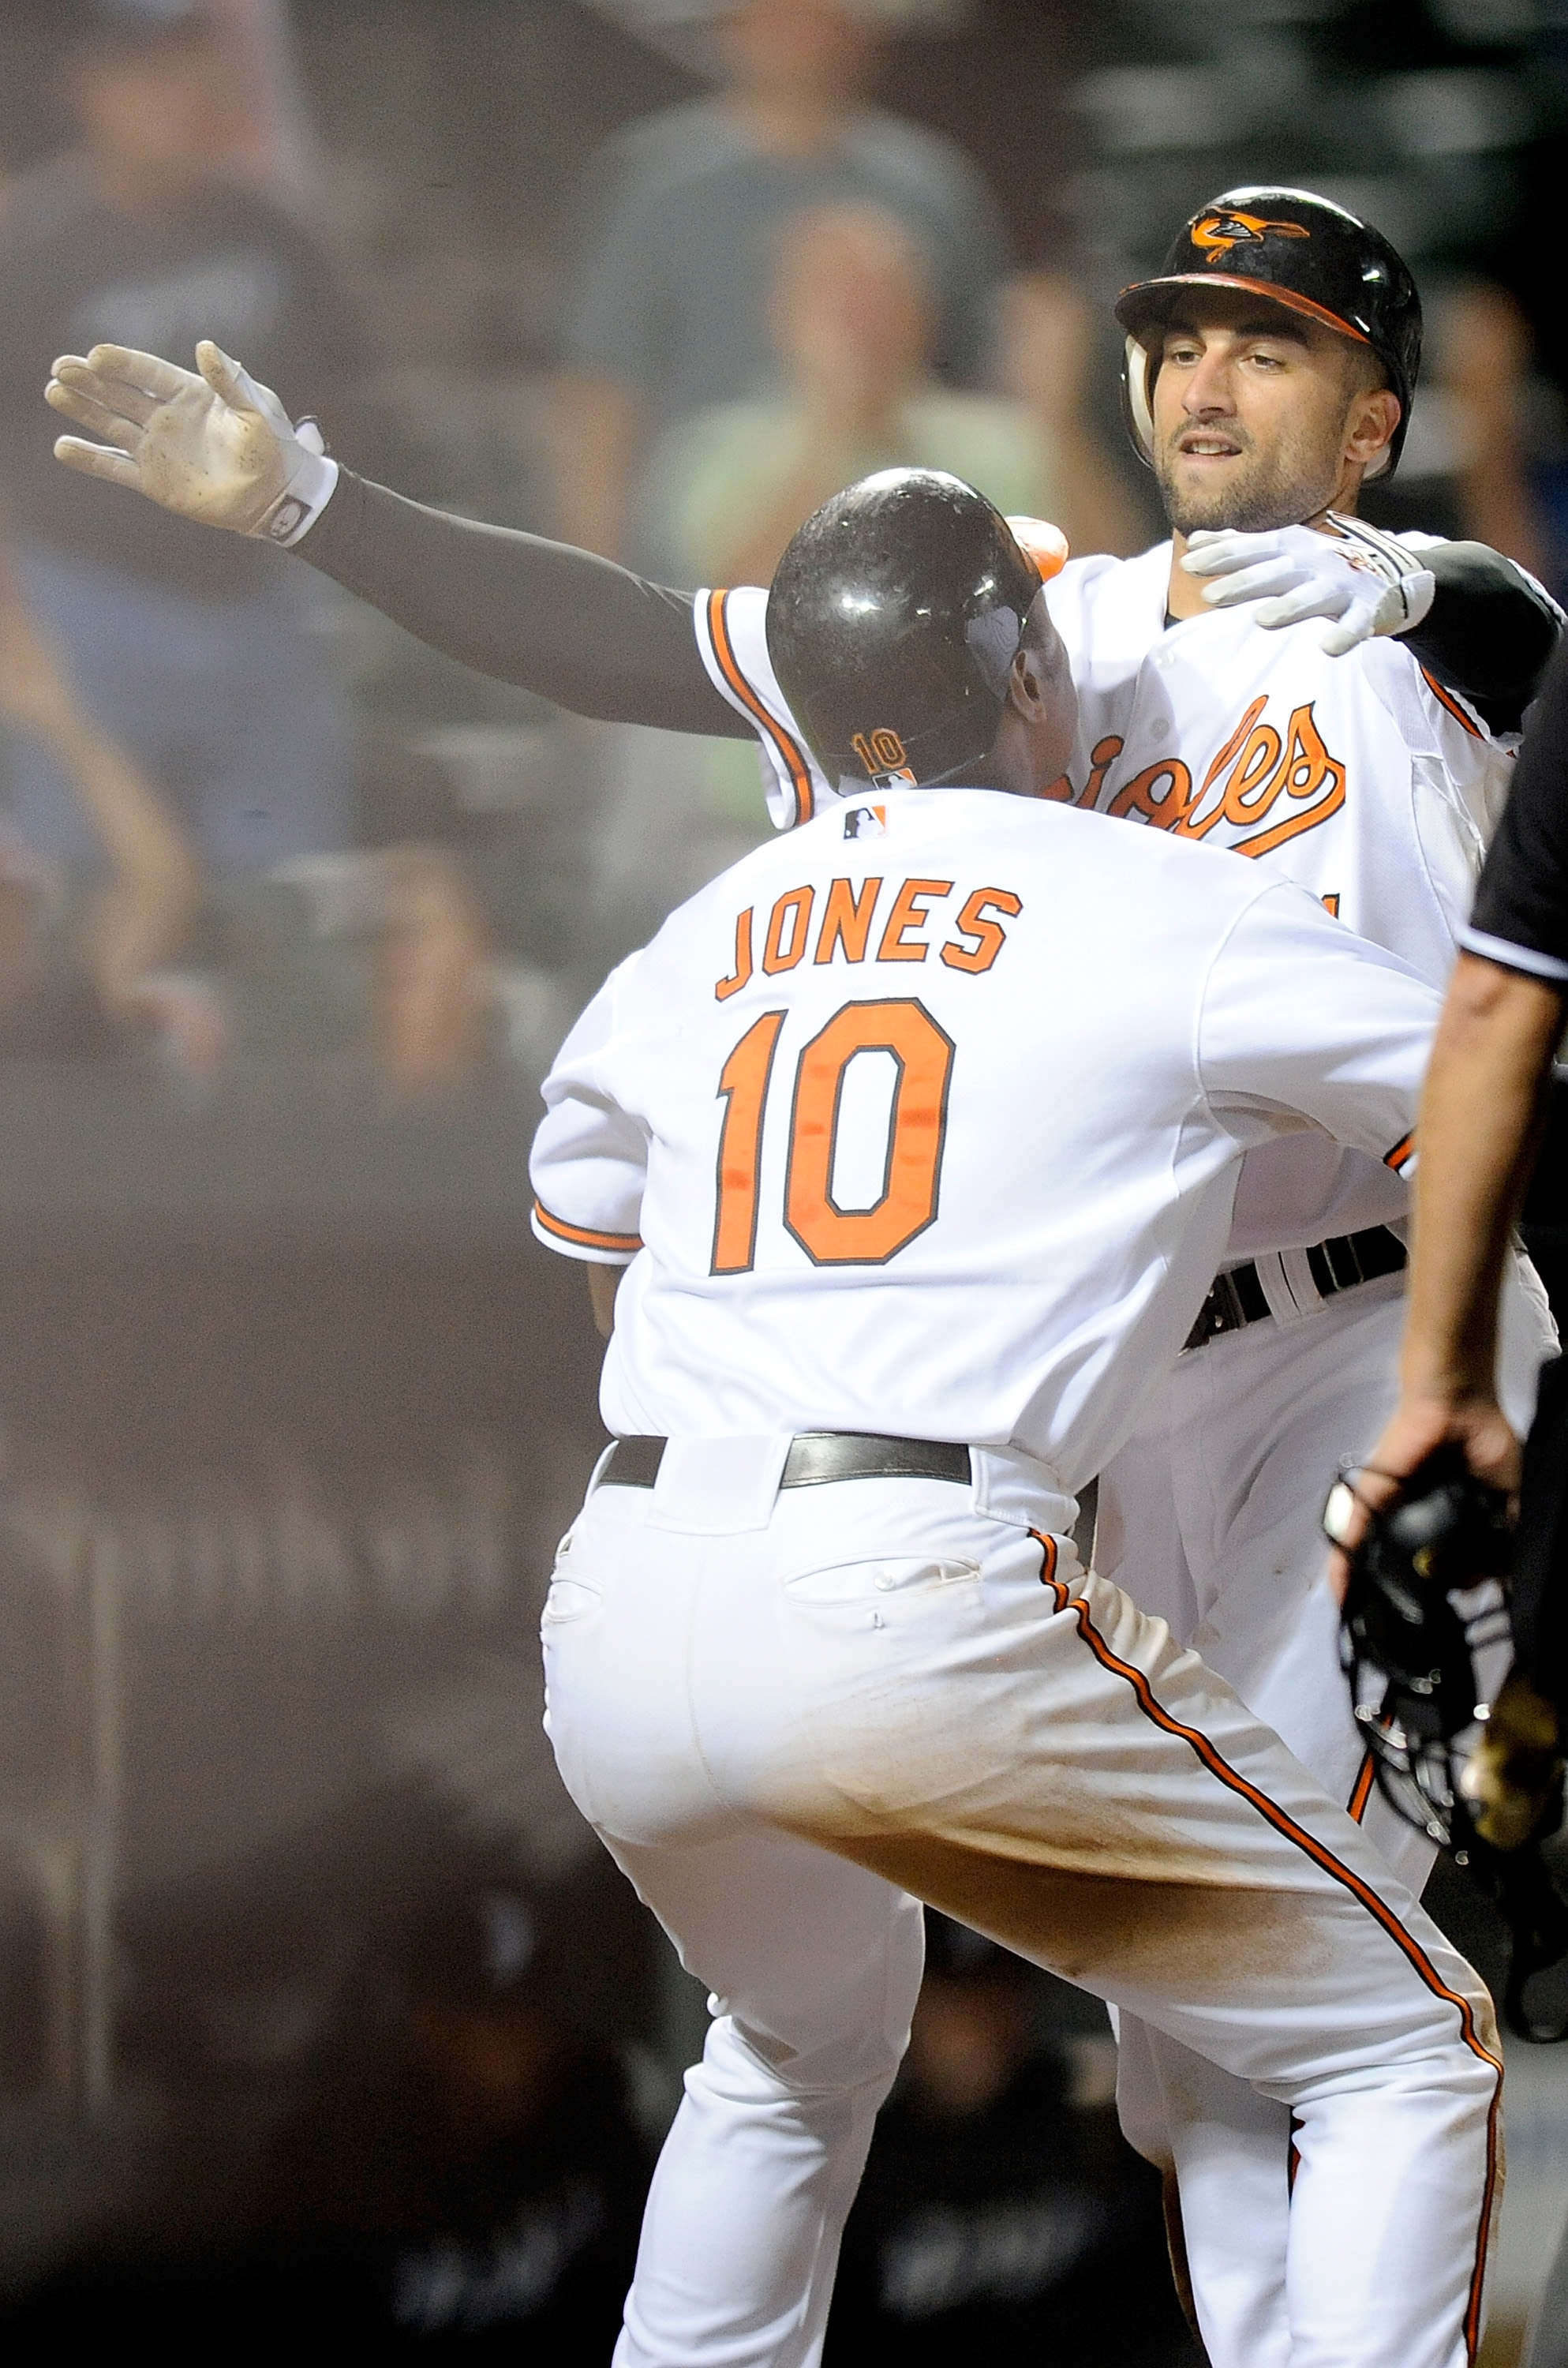 BALTIMORE - SEPTEMBER 13:  Nick Markakis #21 of the Baltimore Orioles celebrates with Adam Jones #10 after scoring the winning run in the eleventh inning against the Toronto Blue Jays at Camden Yards on September 13, 2010 in Baltimore, Maryland. The Oriol